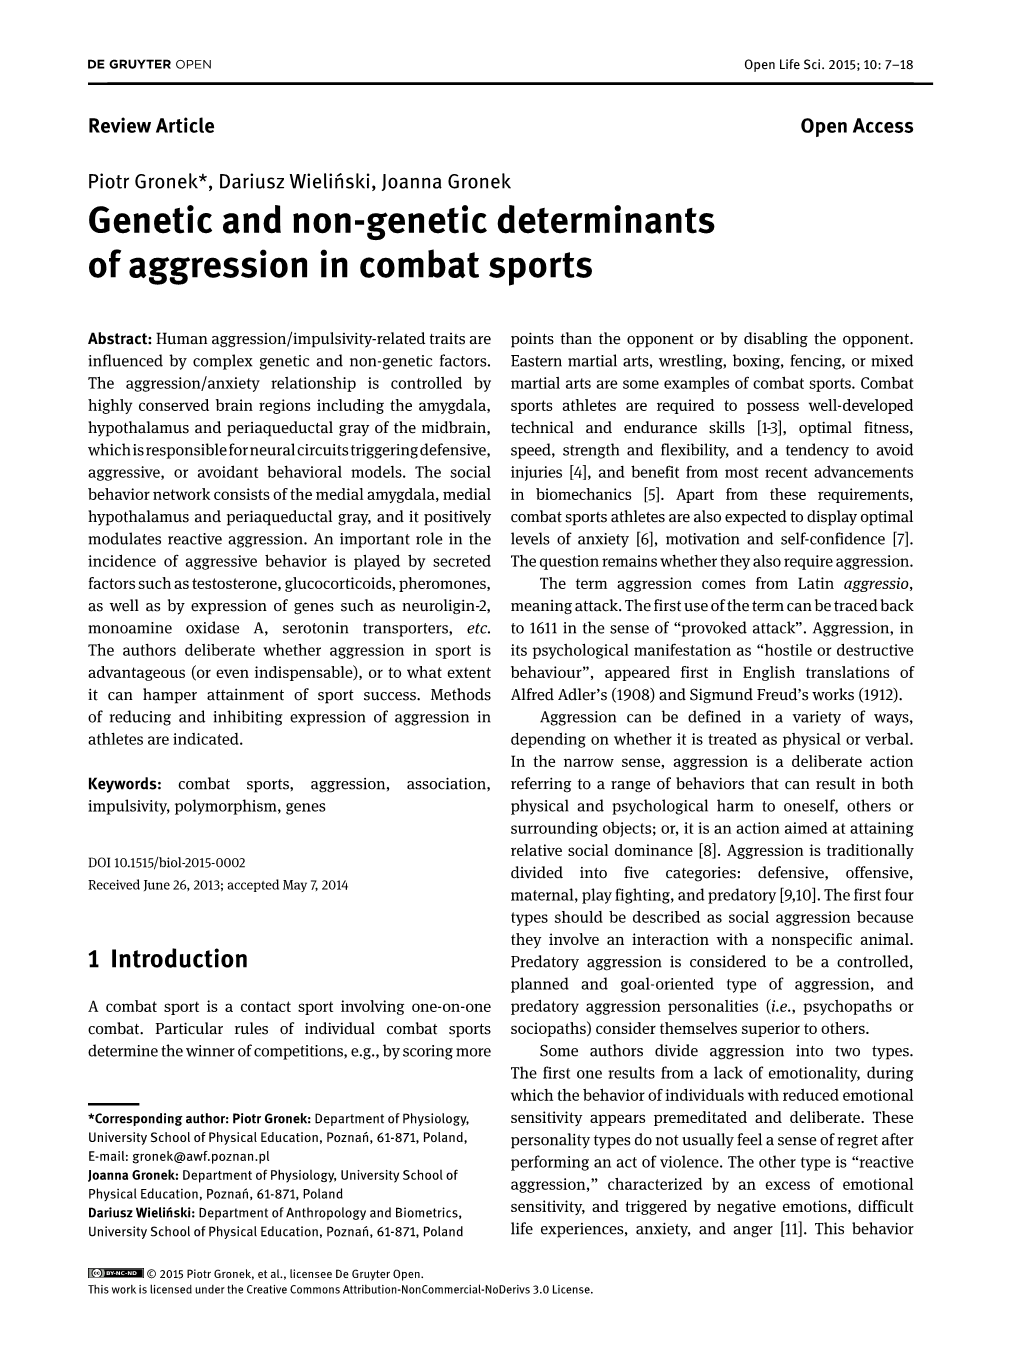 Genetic and Non-Genetic Determinants of Aggression in Combat Sports